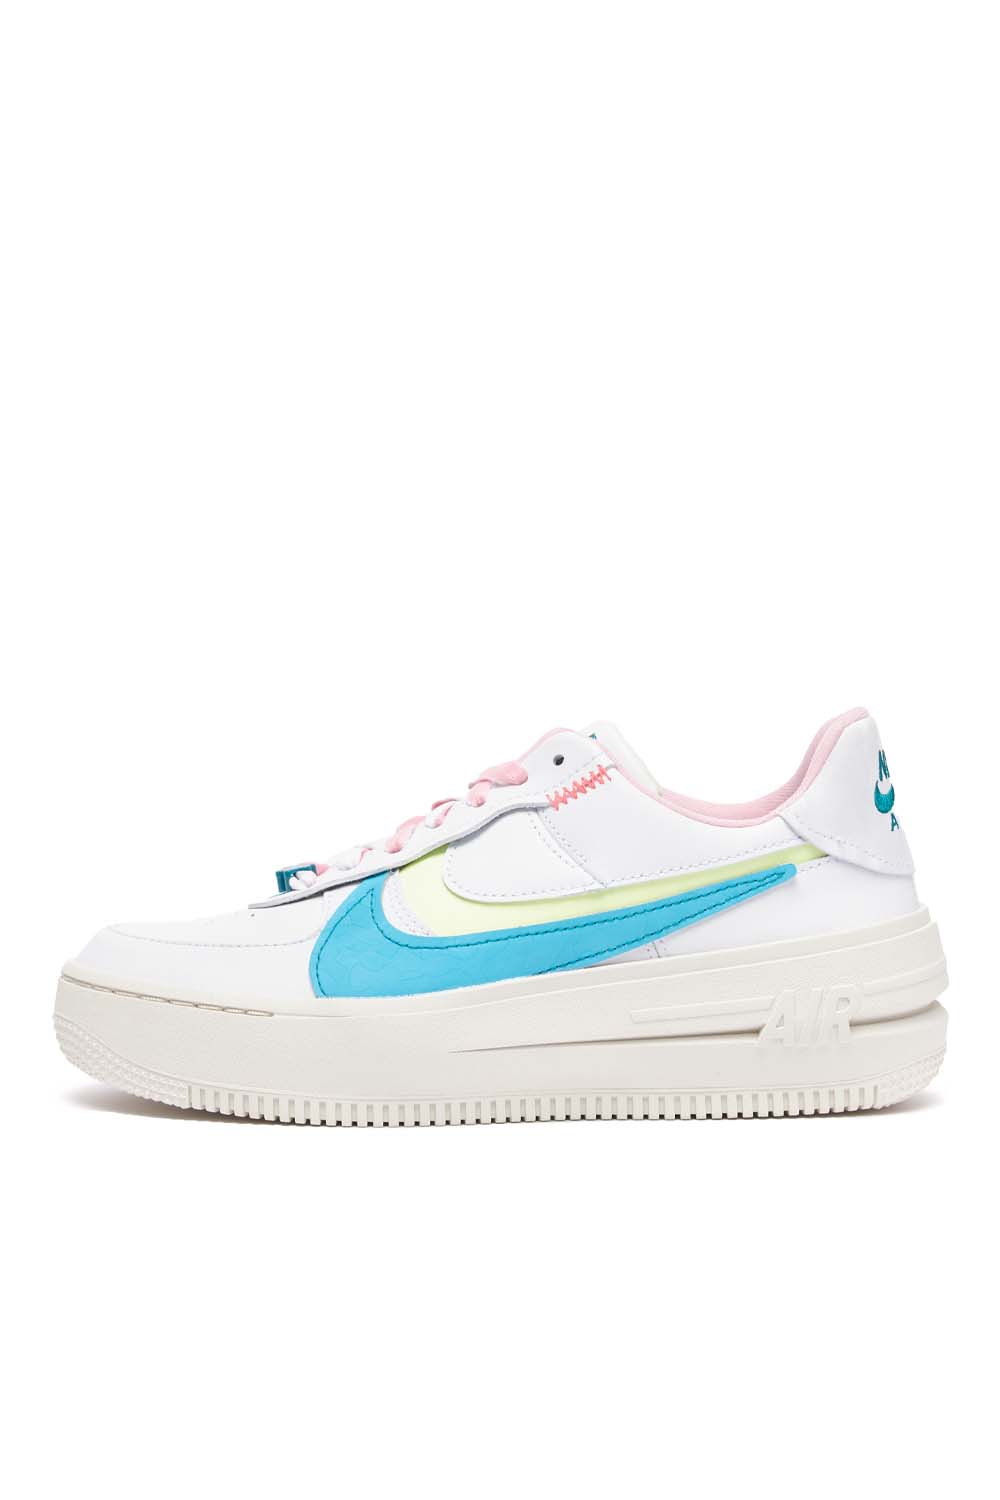 Nike Air Force 1 PLT.AF.ORM Sneakers in Sail White and Baltic Blue